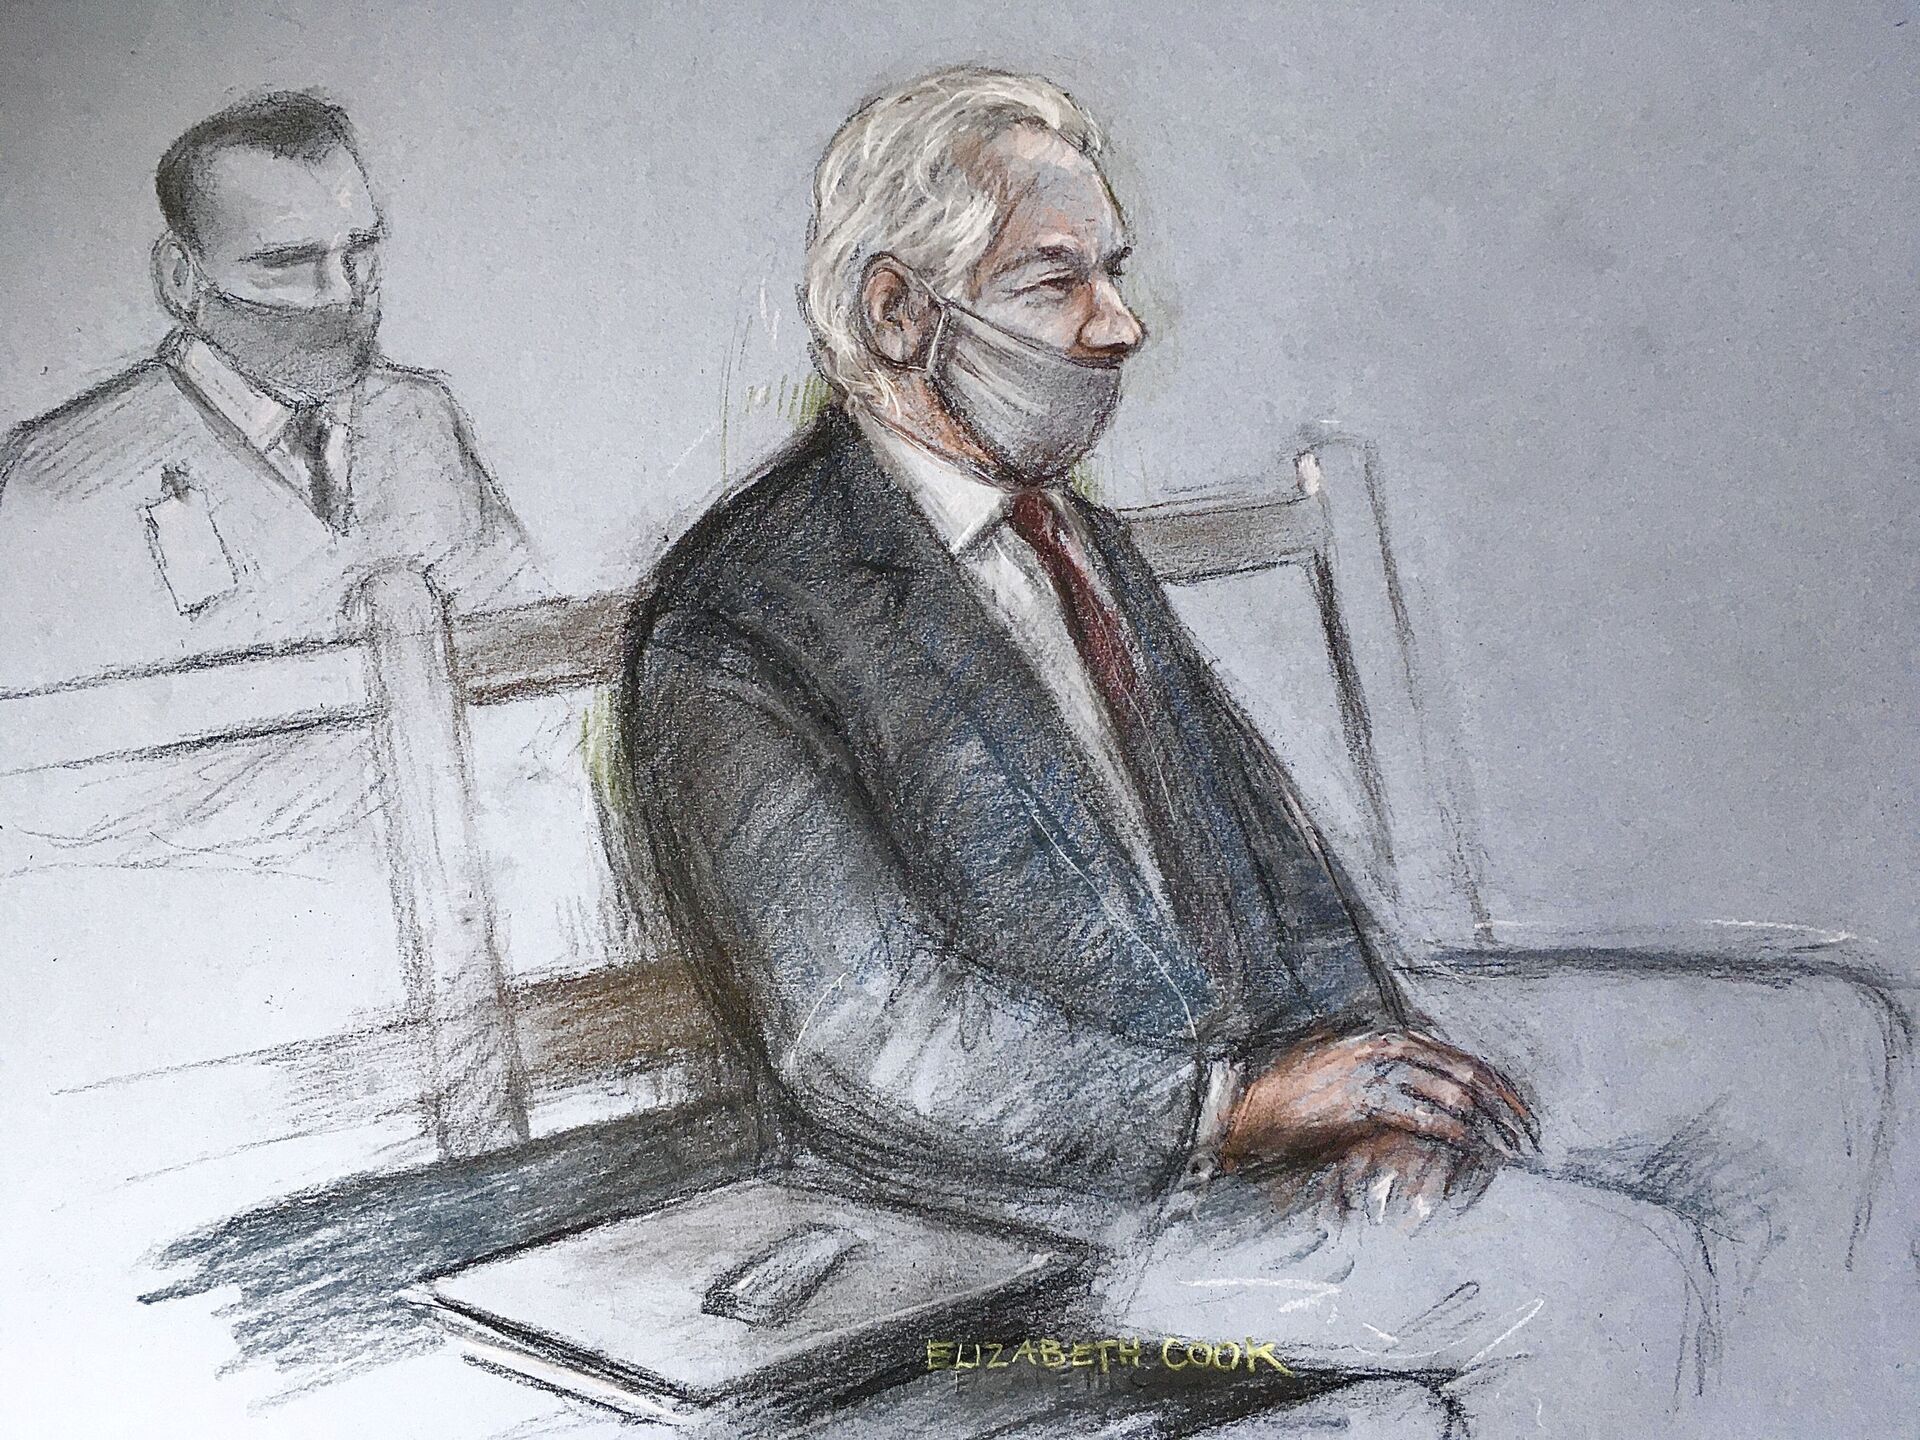 This is a court artist sketch by Elizabeth Cook of Julian Assange appearing at the Old Bailey in London for the ruling in his extradition case, in London, Monday, Jan. 4, 2021. A British judge has rejected the United States’ request to extradite WikiLeaks founder Julian Assange to face espionage charges, saying it would be “oppressive” because of his mental health. District Judge Vanessa Baraitser said Assange was likely to kill himself if sent to the U.S. The U.S. government said it would appeal the decision.  (Elizabeth Cook/PA via AP) - Sputnik International, 1920, 05.10.2021